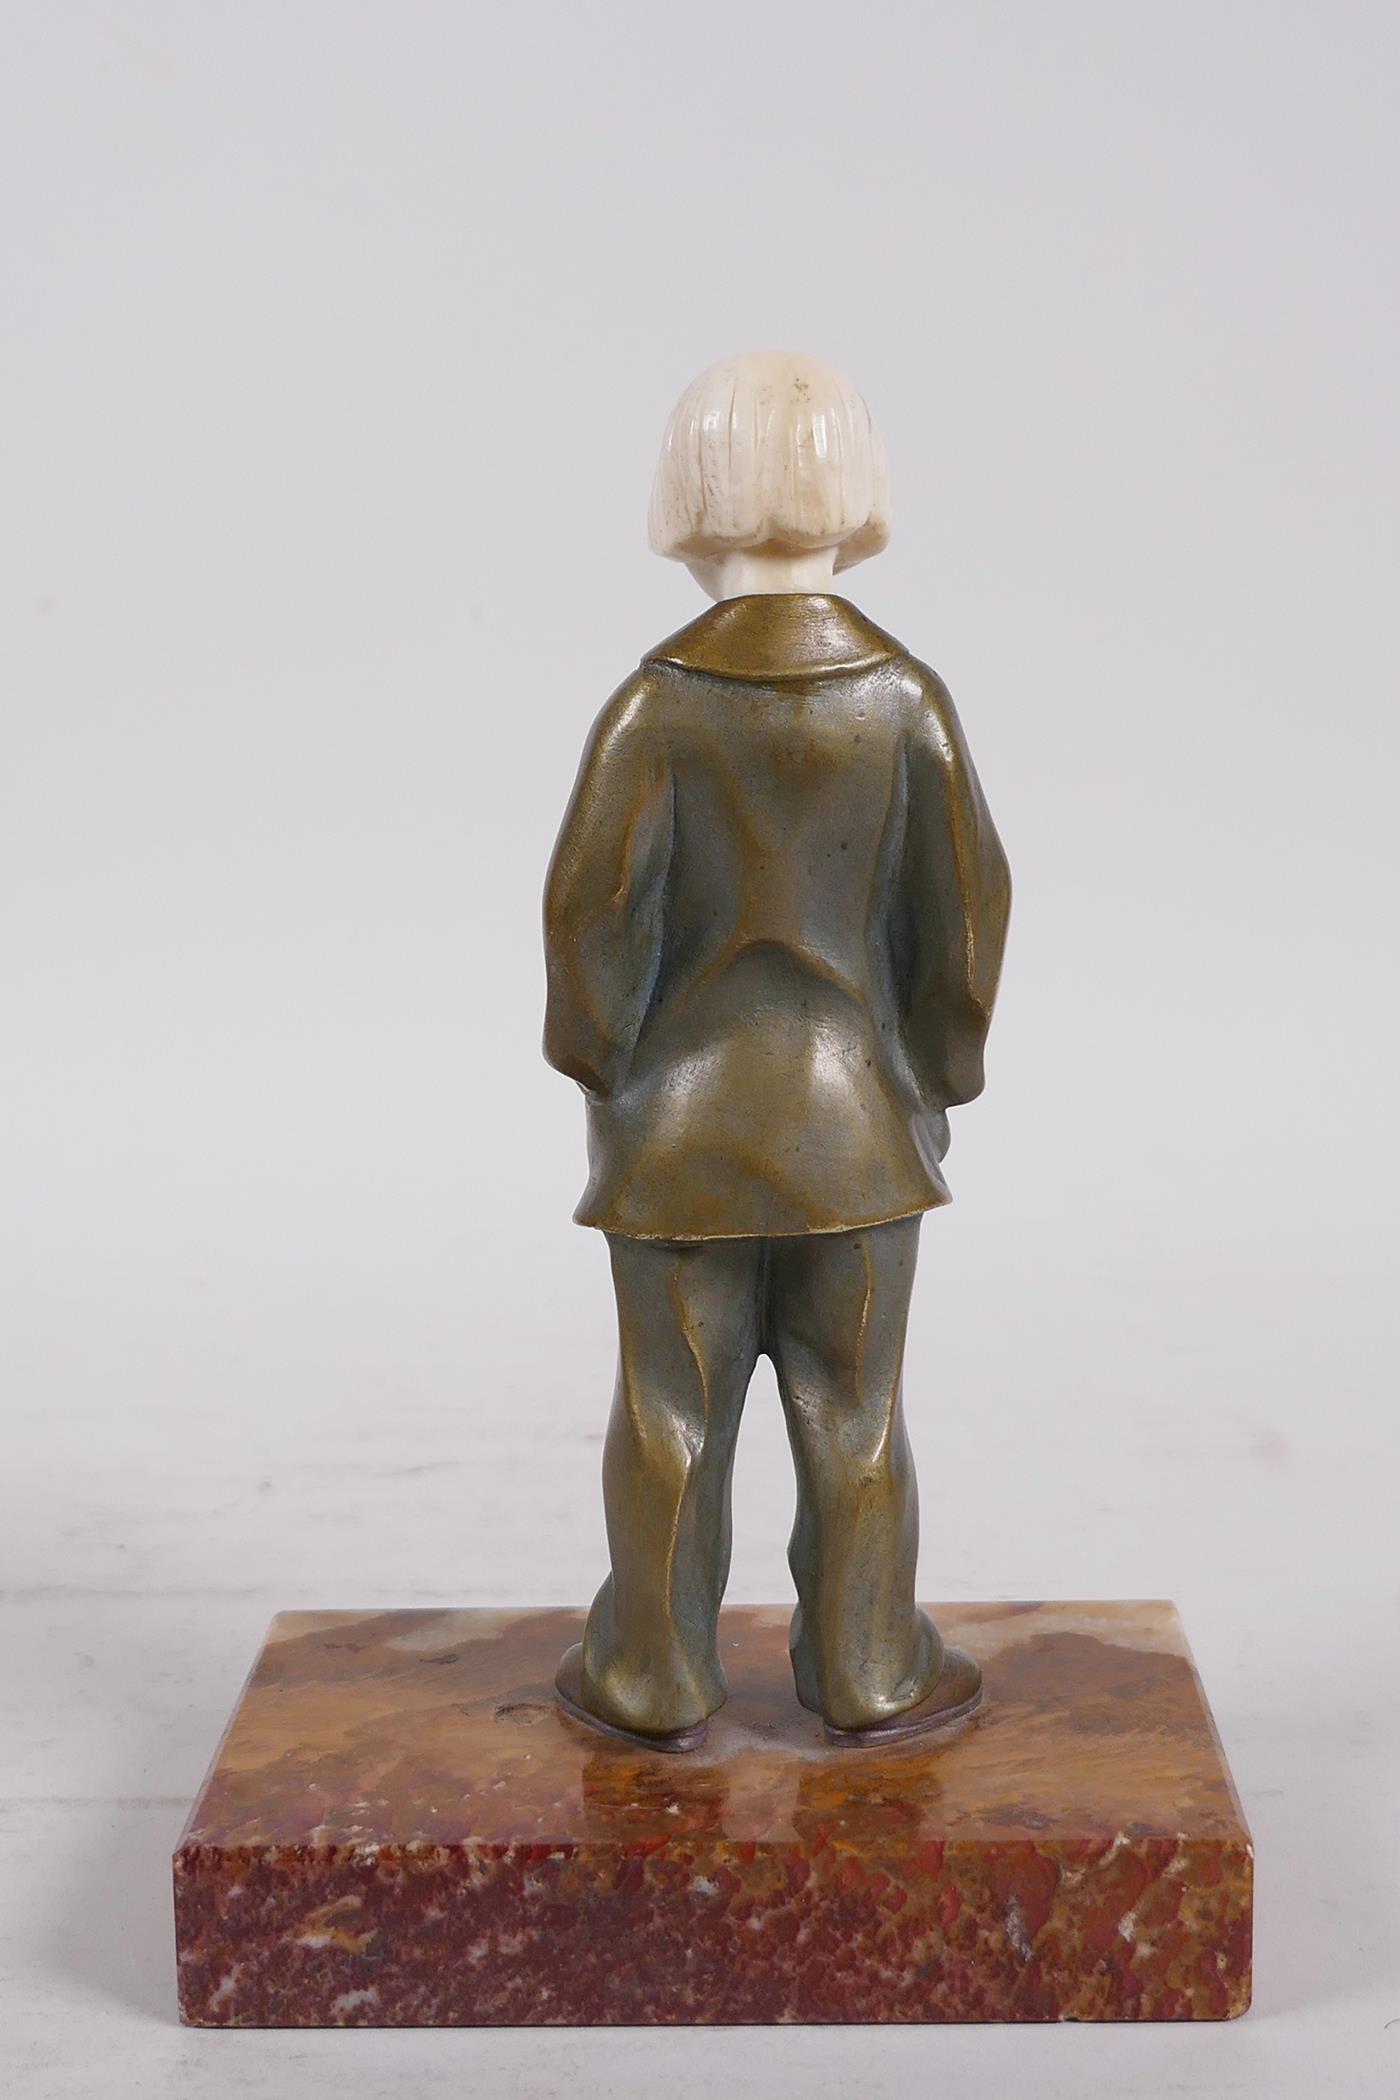 Soulange Bertrand (1913-2011), bronze figure of a young girl, mounted on a marble base, 7" high - Image 5 of 5